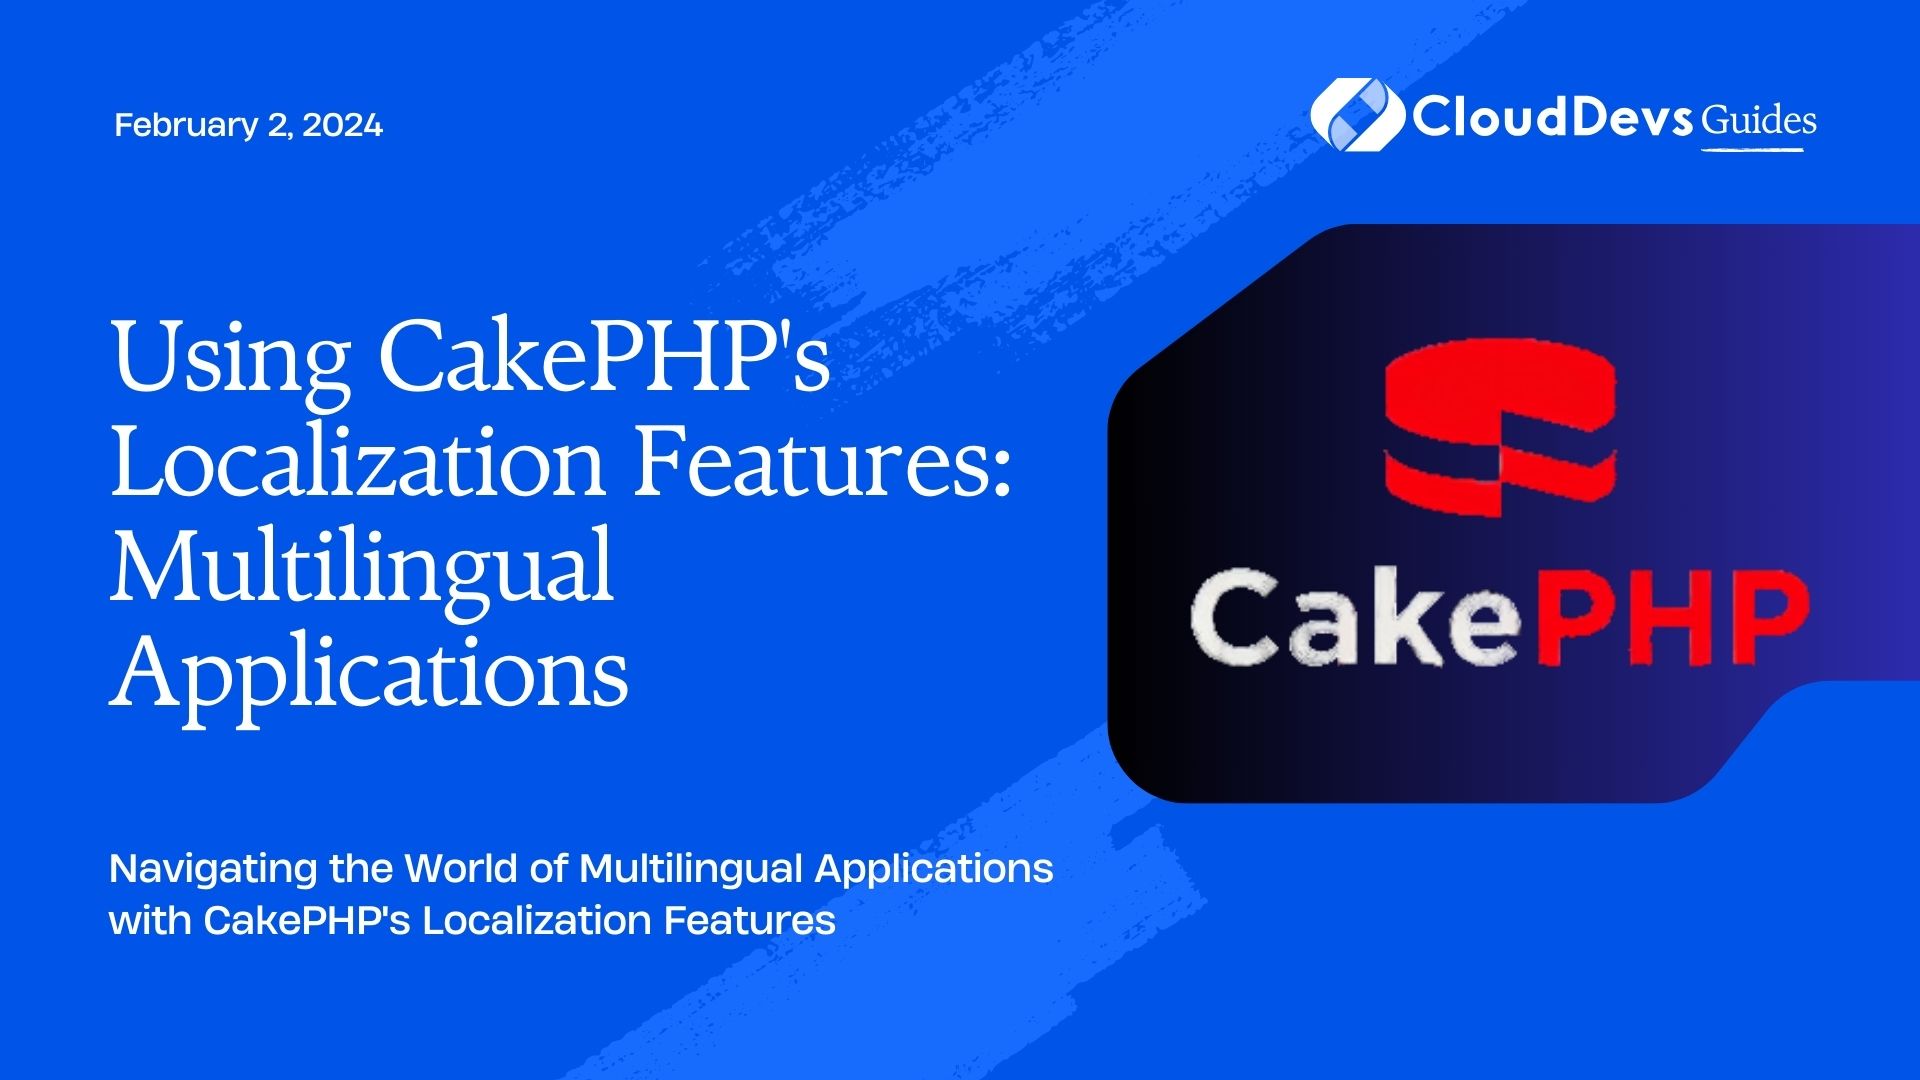 Using CakePHP's Localization Features: Multilingual Applications